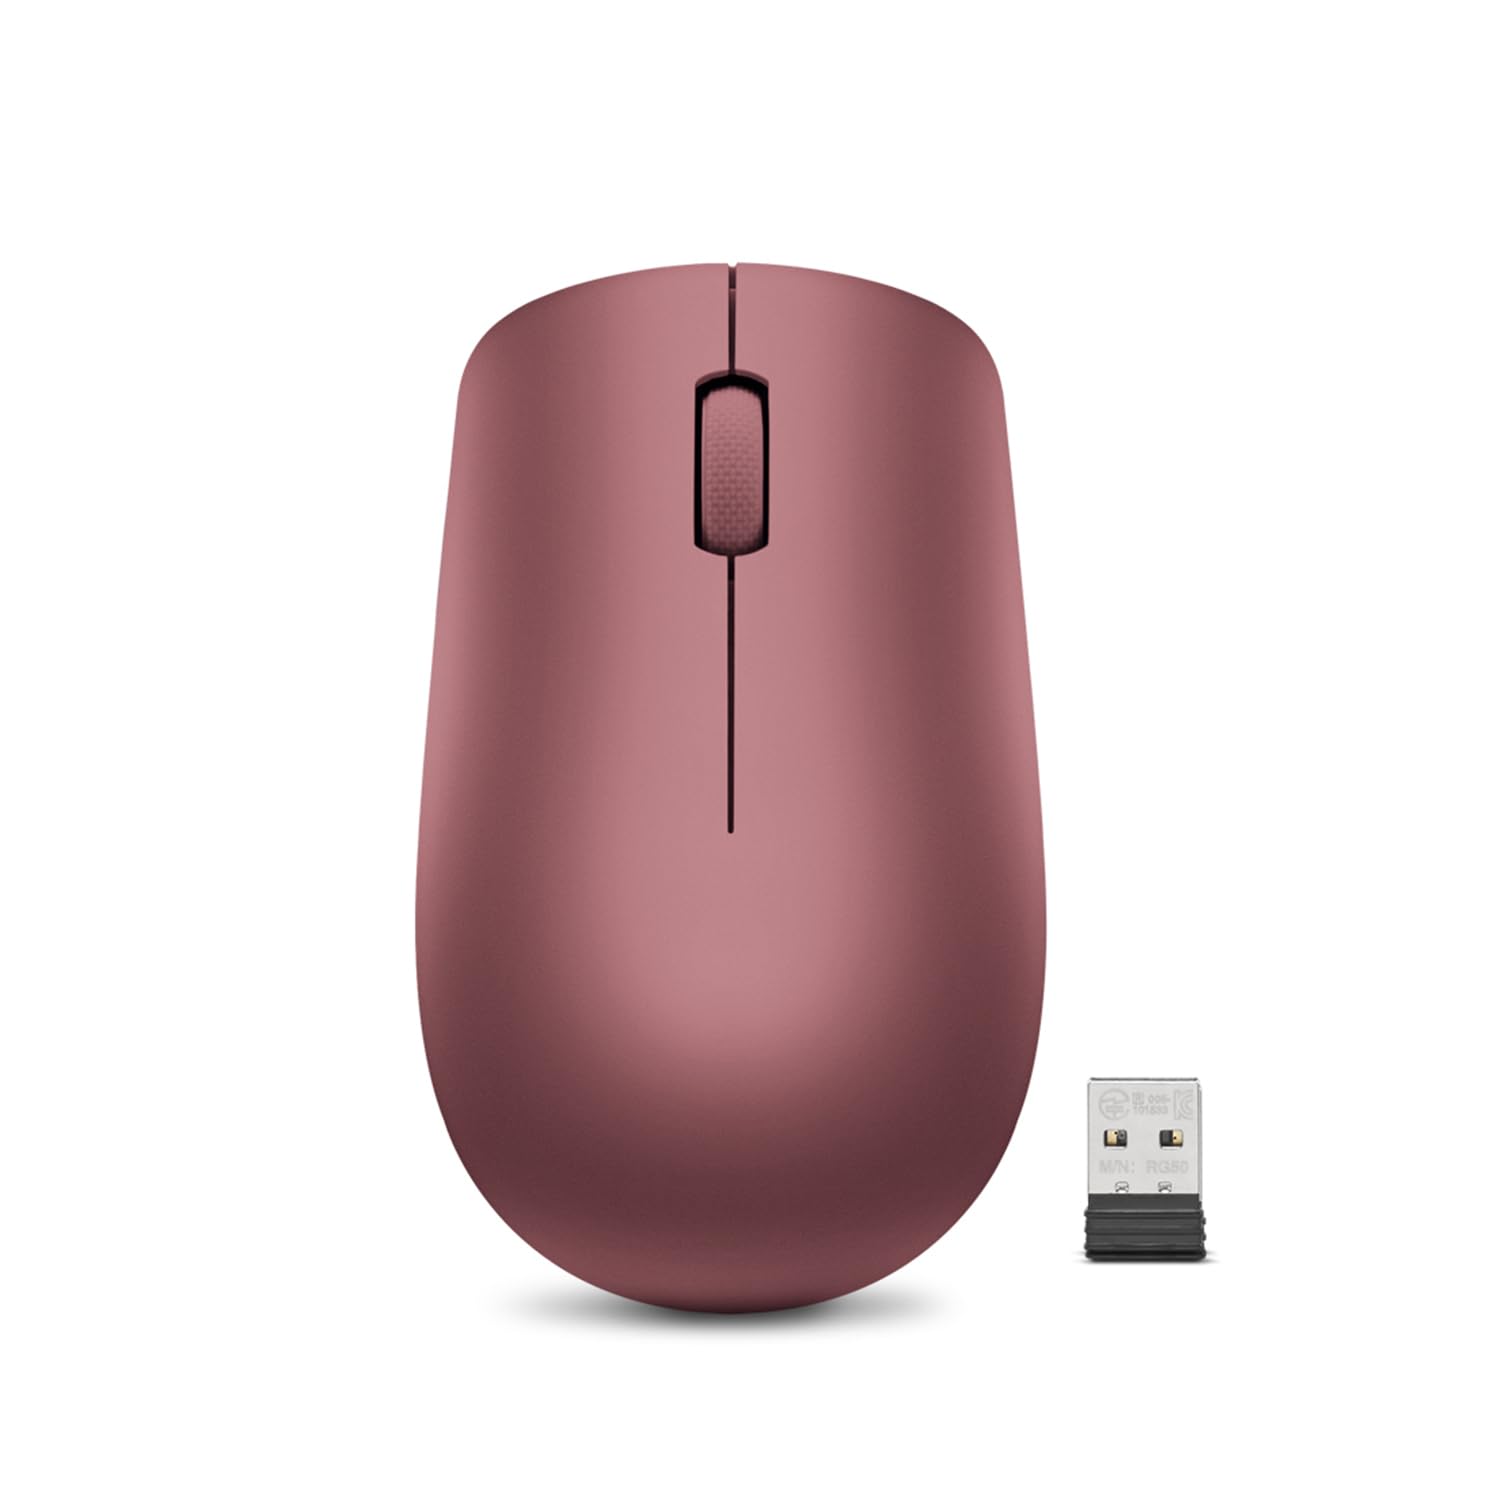 Lenovo 530 Full Size Wireless Computer Mouse (Cherry Red) $9 + Free Shipping w/ Prime or on $35